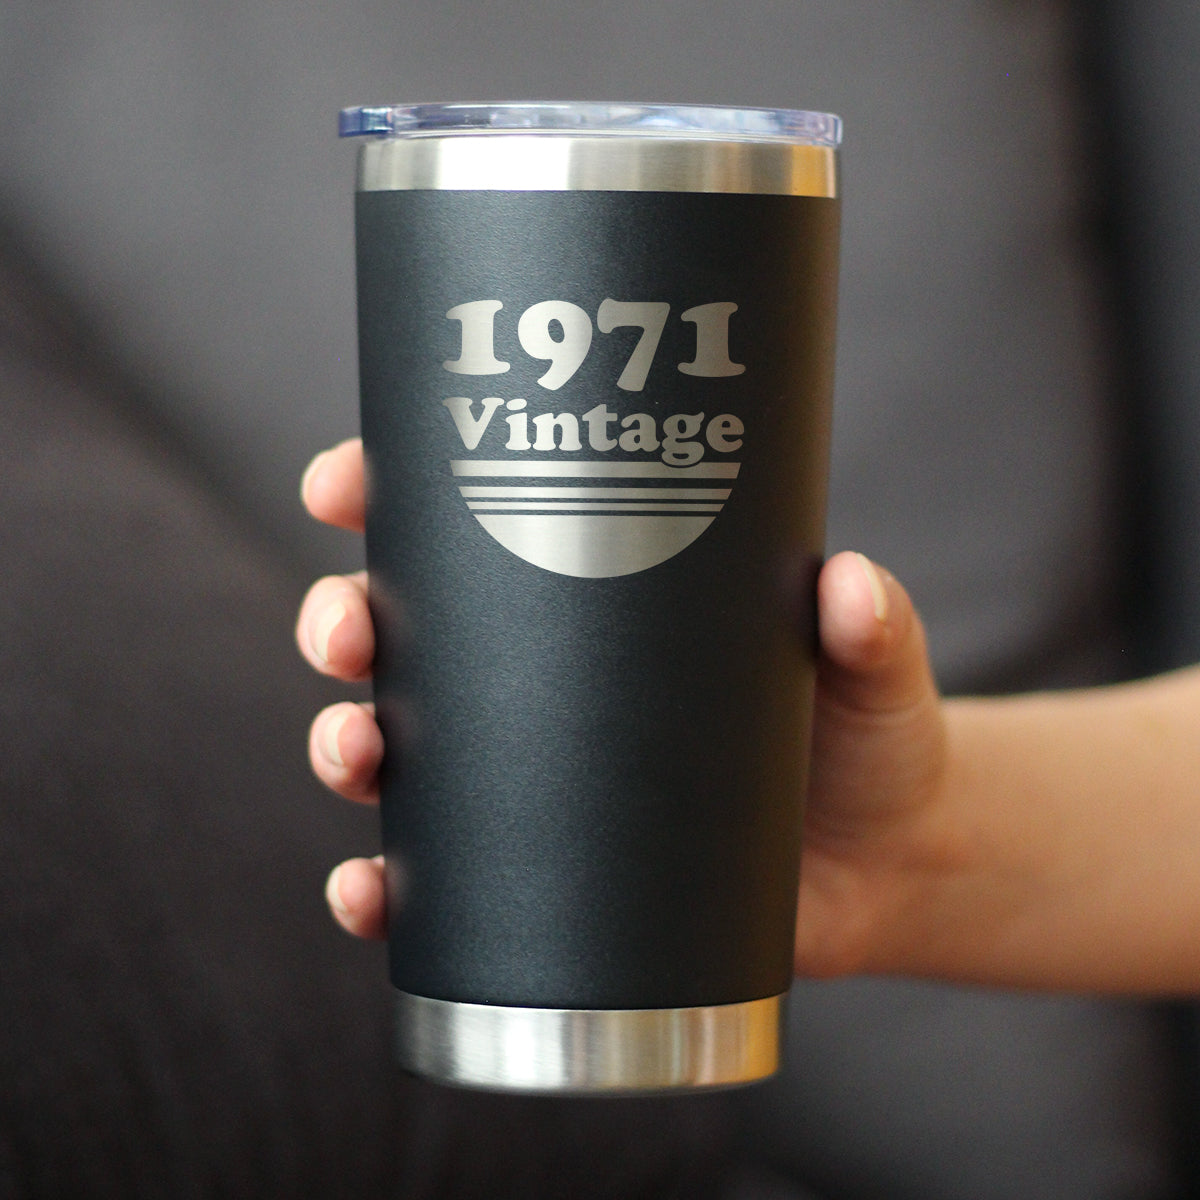 Vintage 1971 - Insulated Coffee Tumbler Cup with Sliding Lid - 20 oz - Funny 53rd Birthday Gift for Women or Men Turning 53